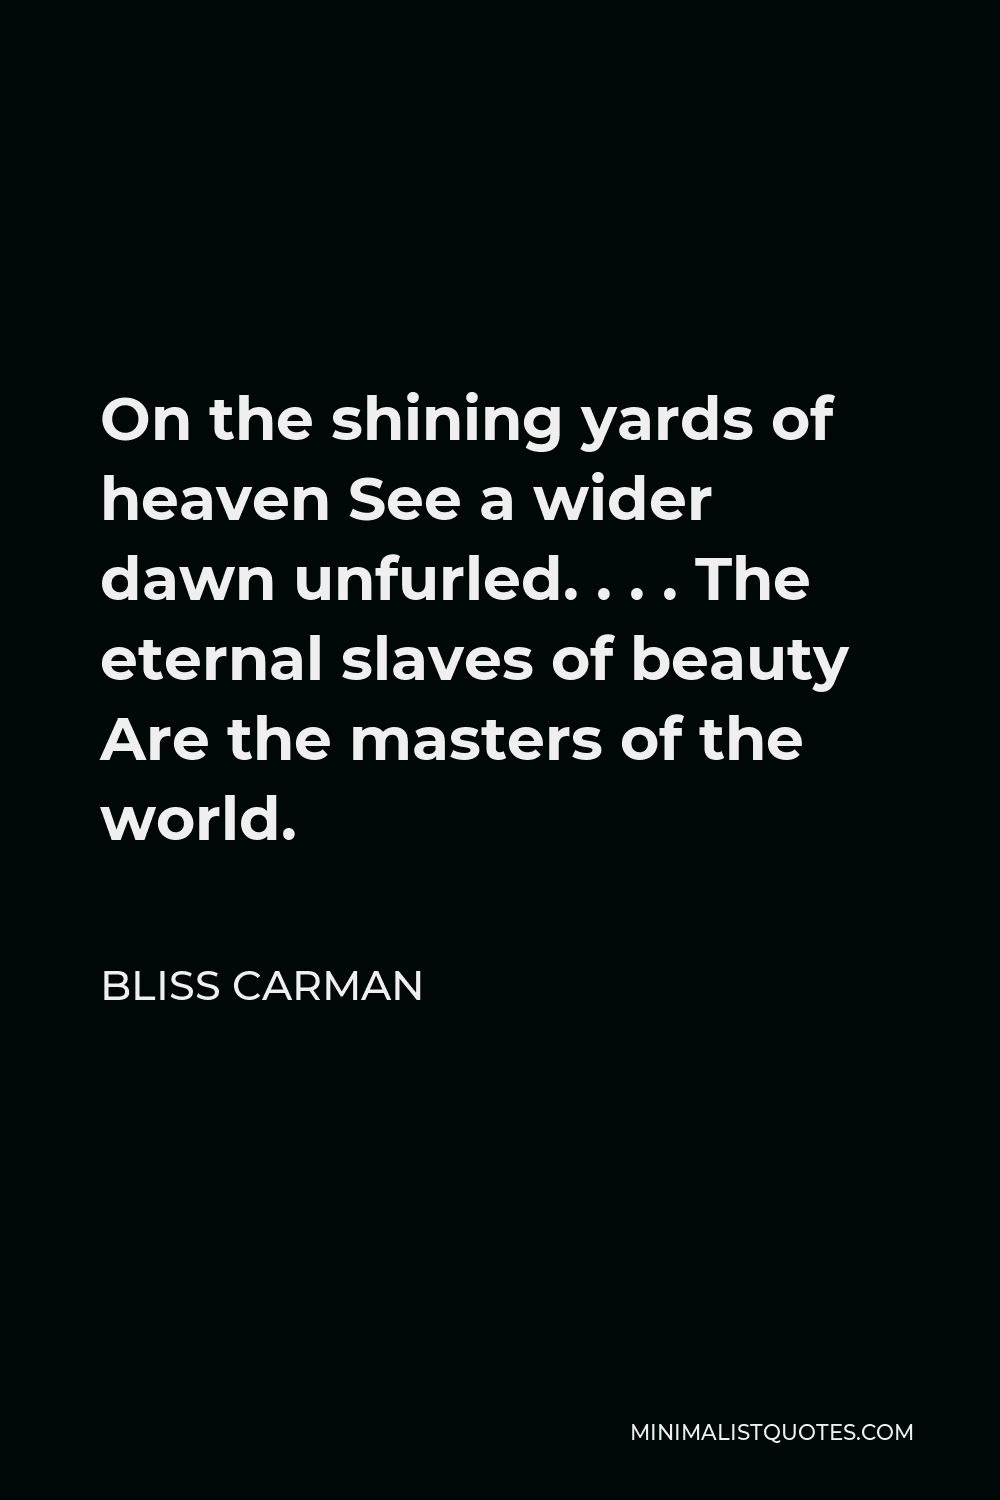 Bliss Carman Quote - On the shining yards of heaven See a wider dawn unfurled. . . . The eternal slaves of beauty Are the masters of the world.